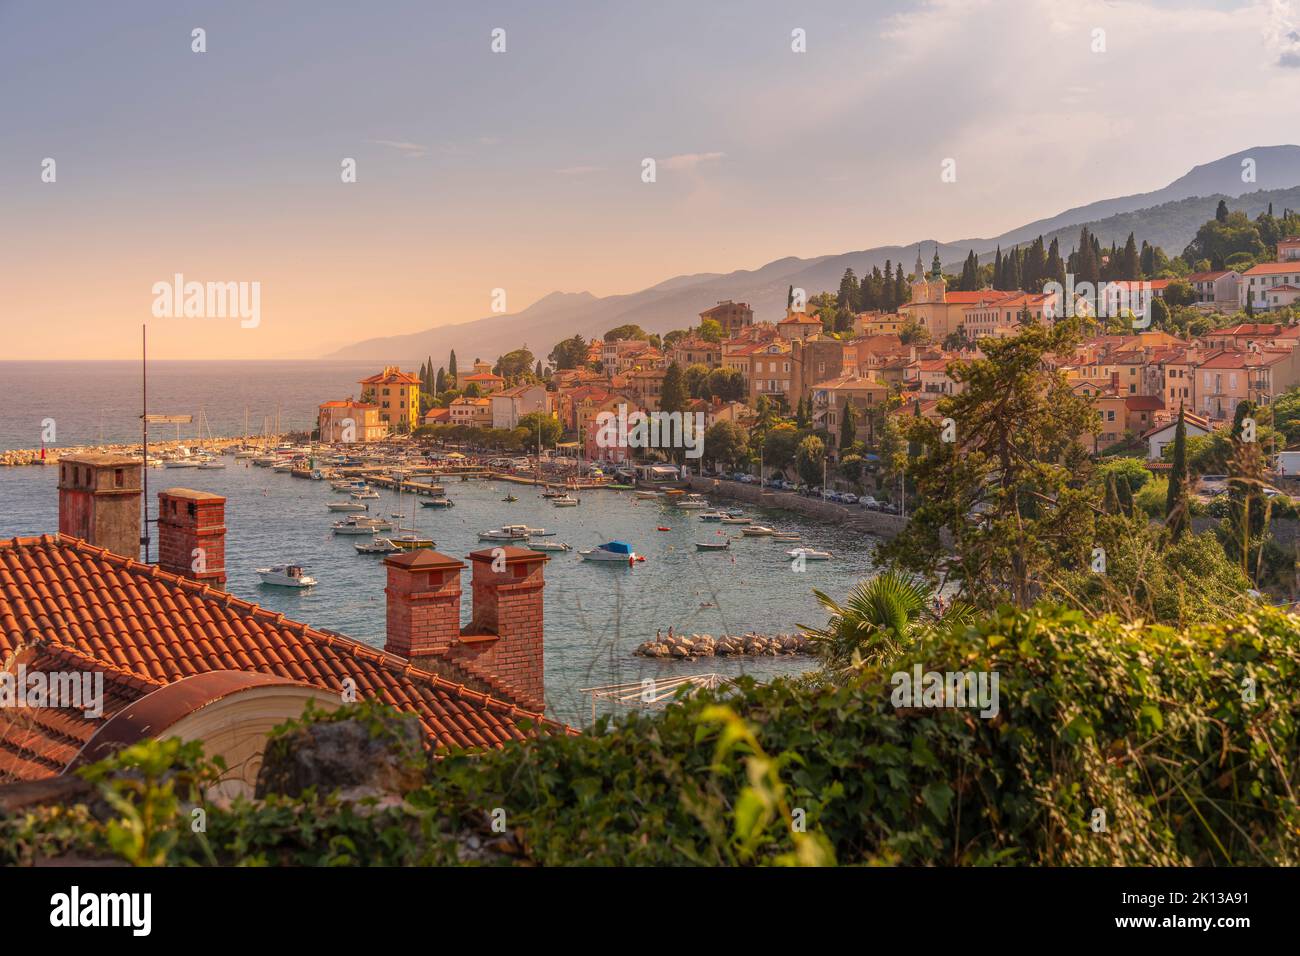 View of marina, rooftops and bay from elevated position in Volosko, Opatija, Kvarner Bay, Croatia, Europe Stock Photo